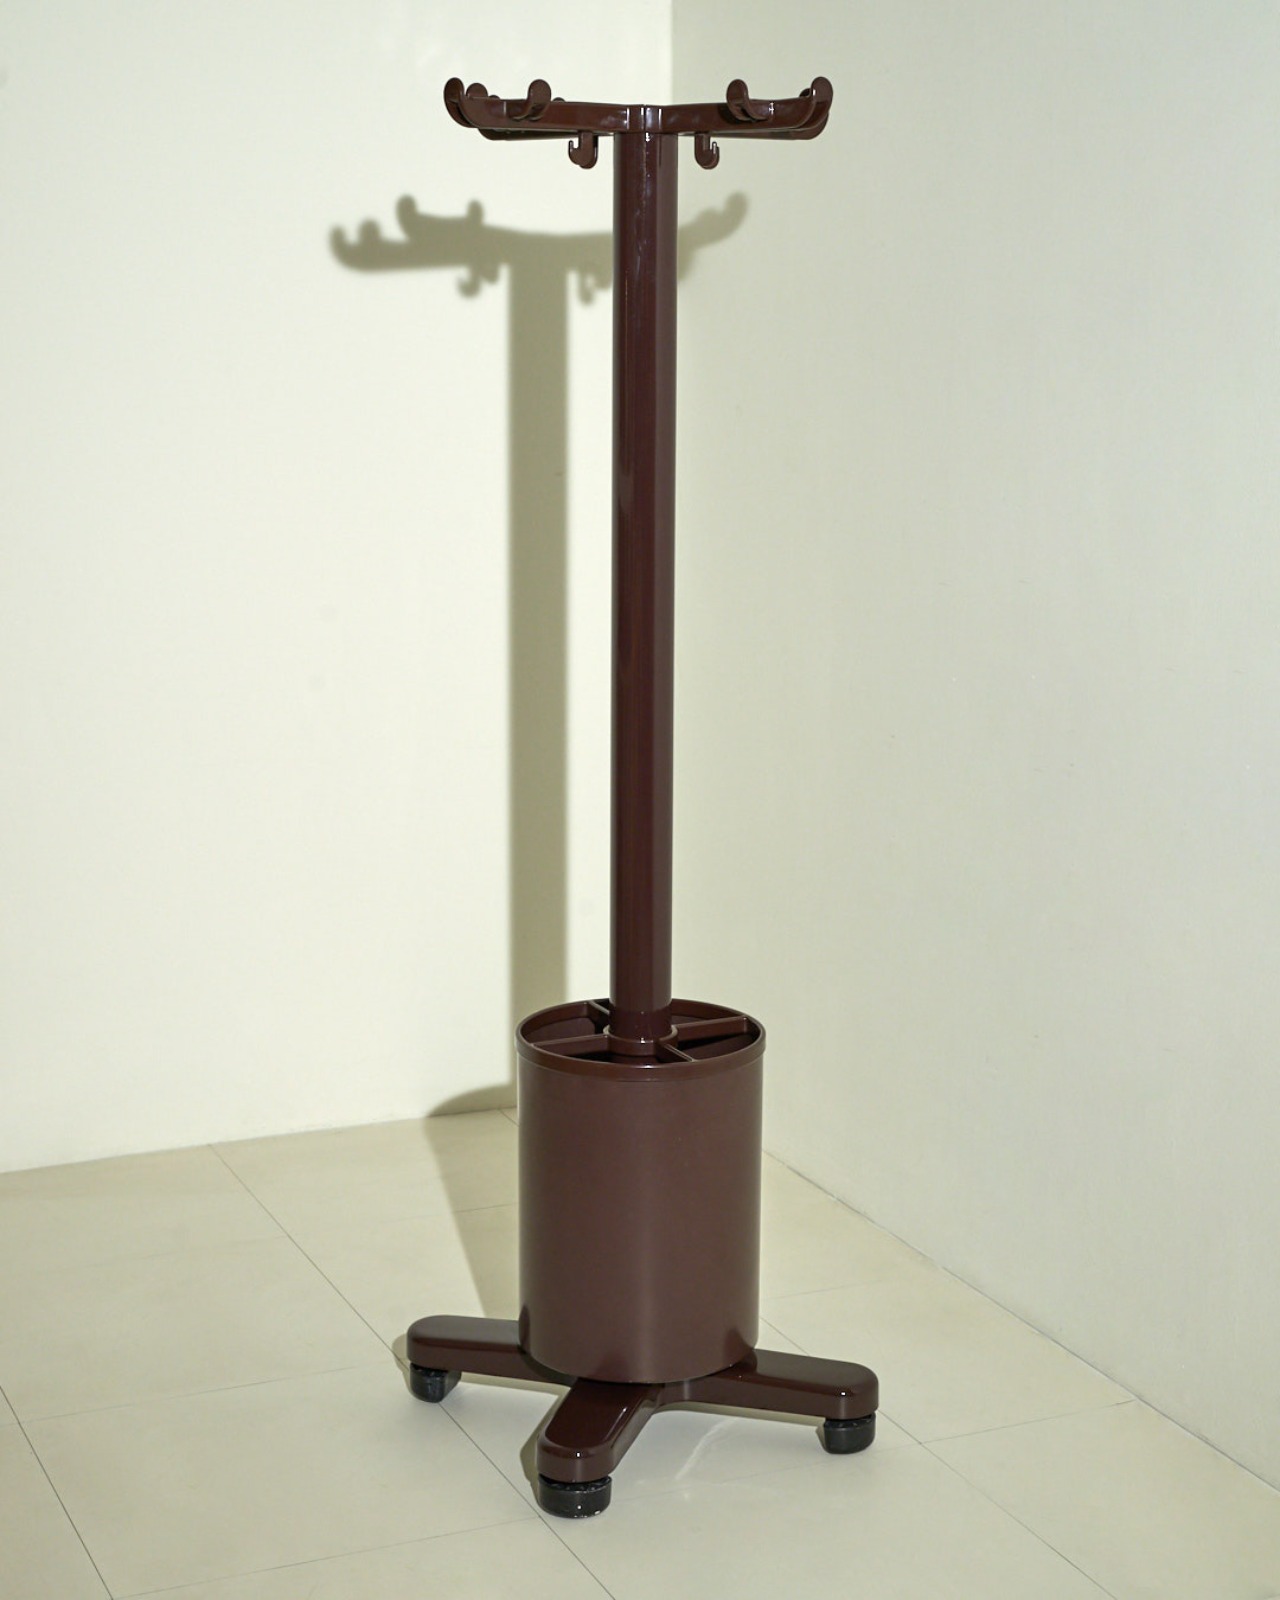 #6076 / Olivetti Synthesis 45 Coat Stand by Ettore Sottsass (brown)